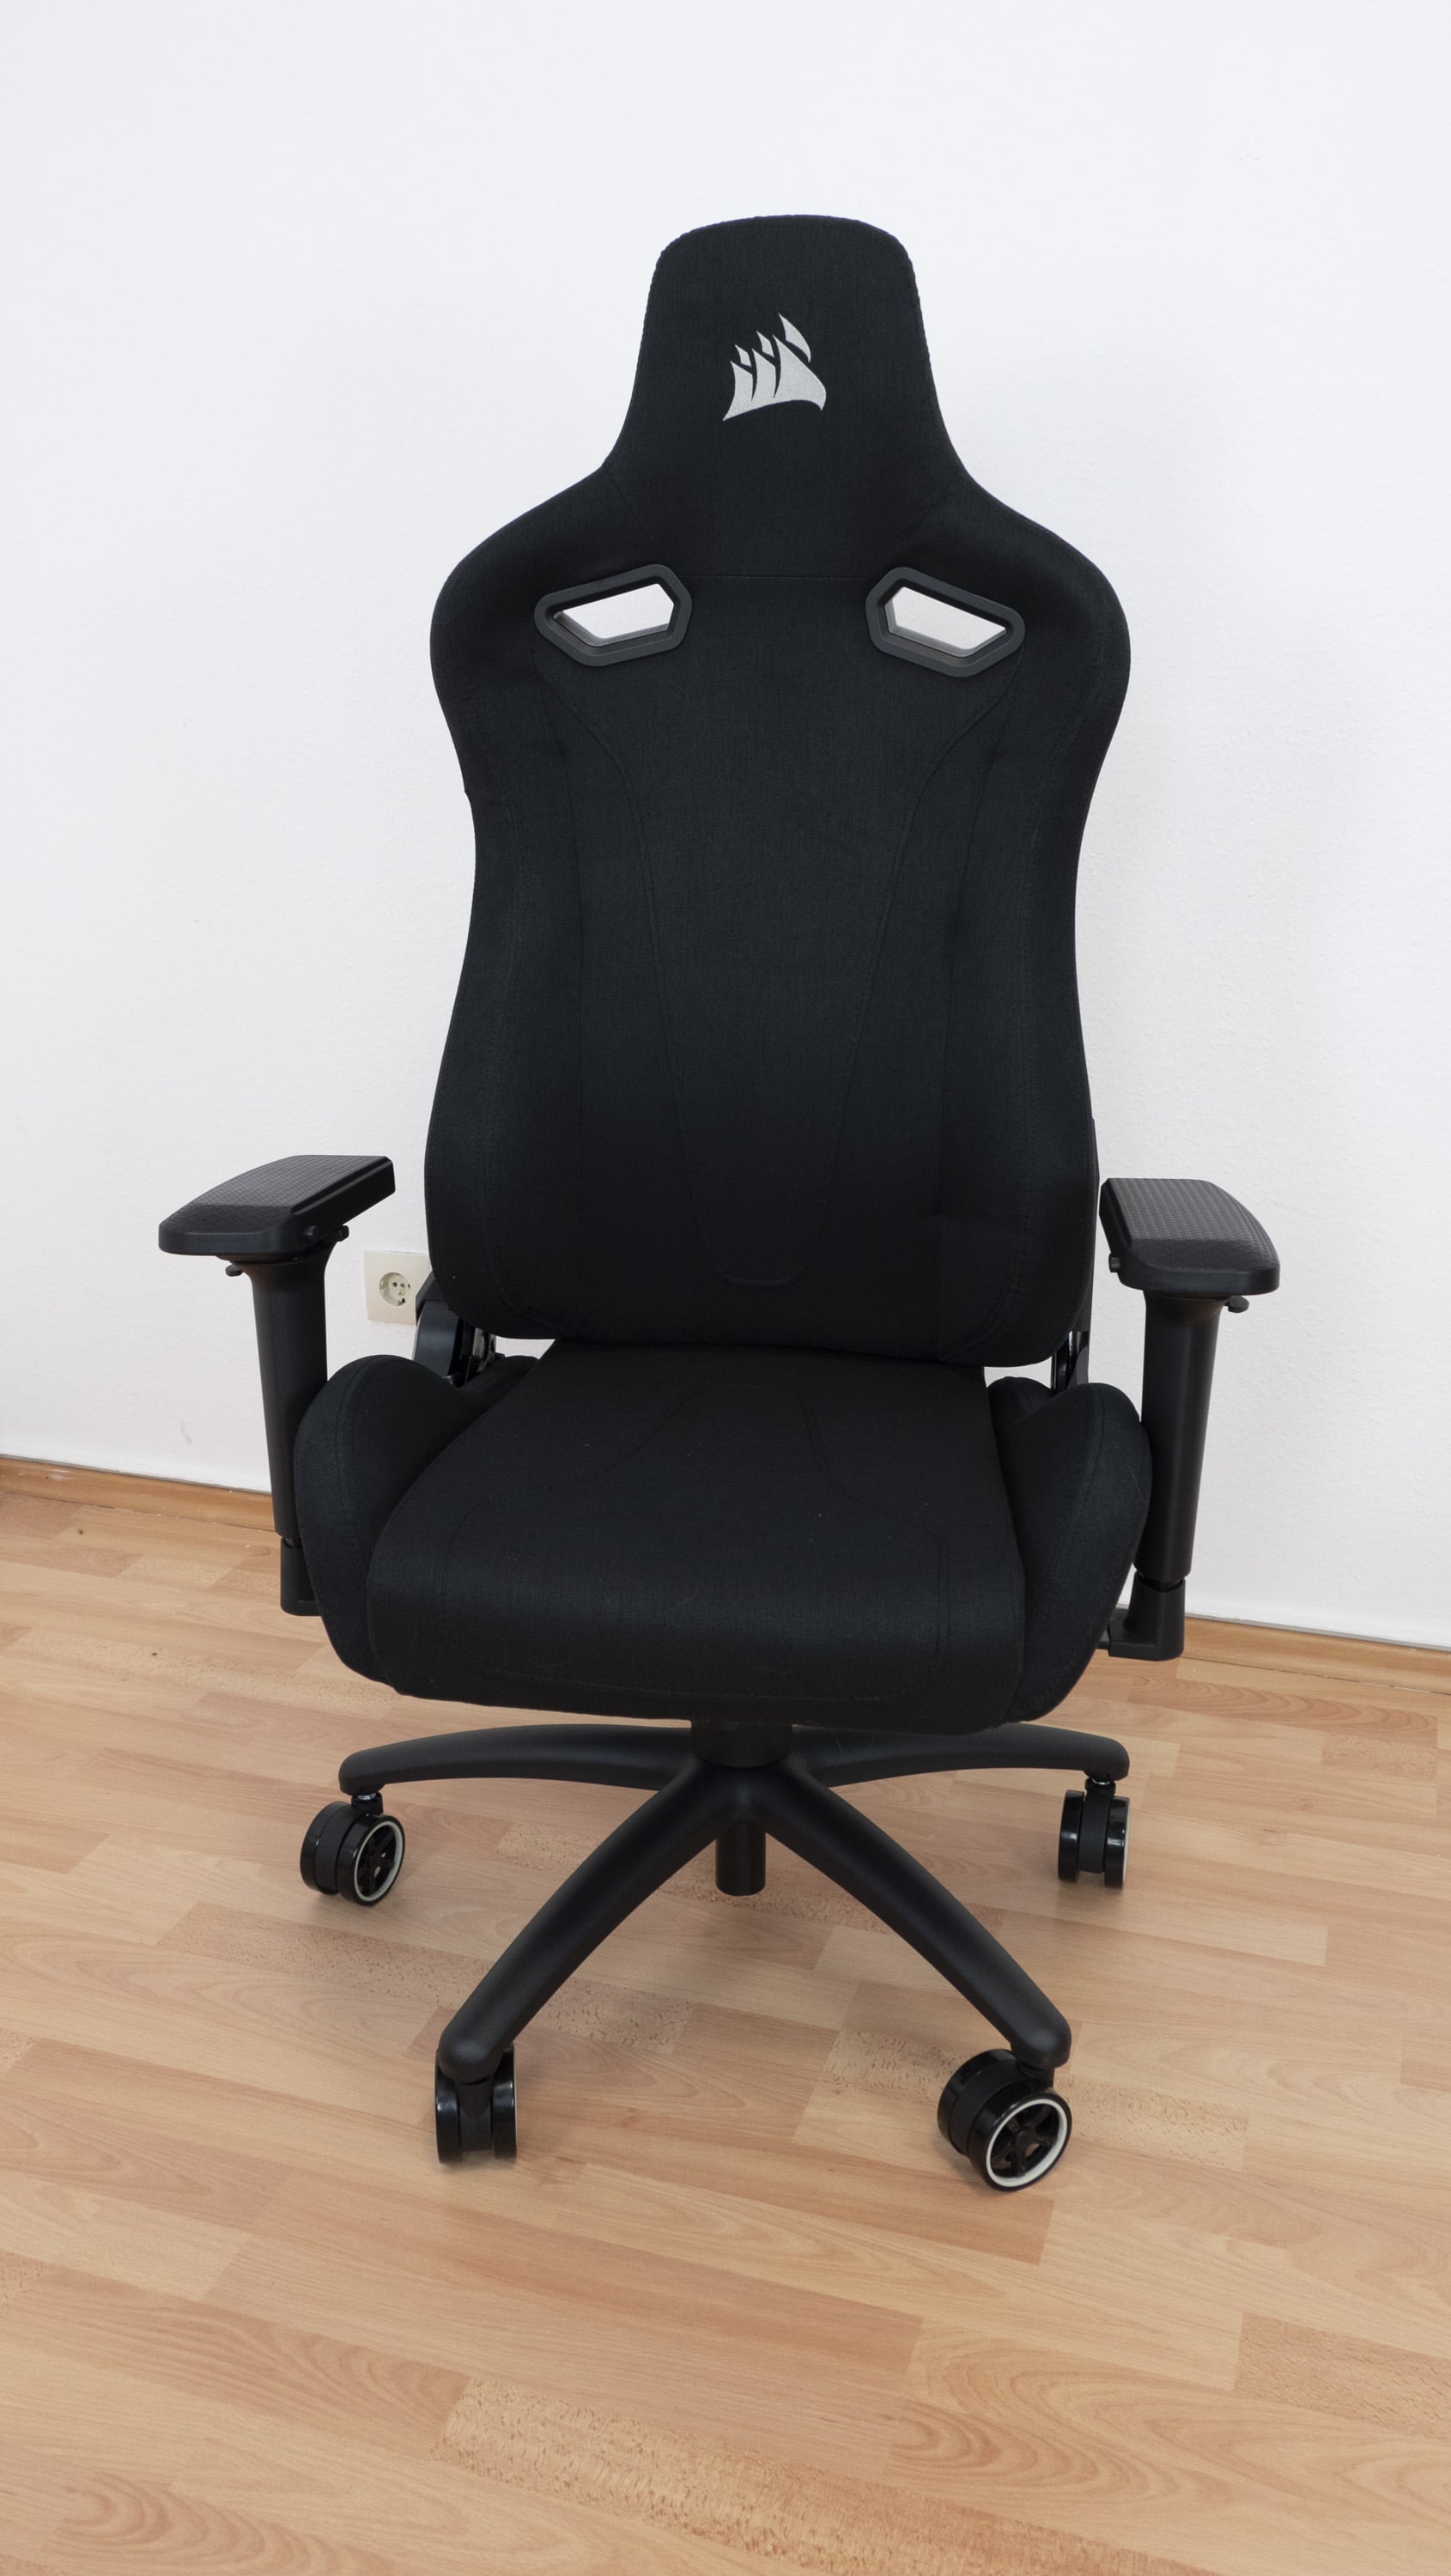 Corsair TC200 gaming chair in test: There\'s room for everyone!